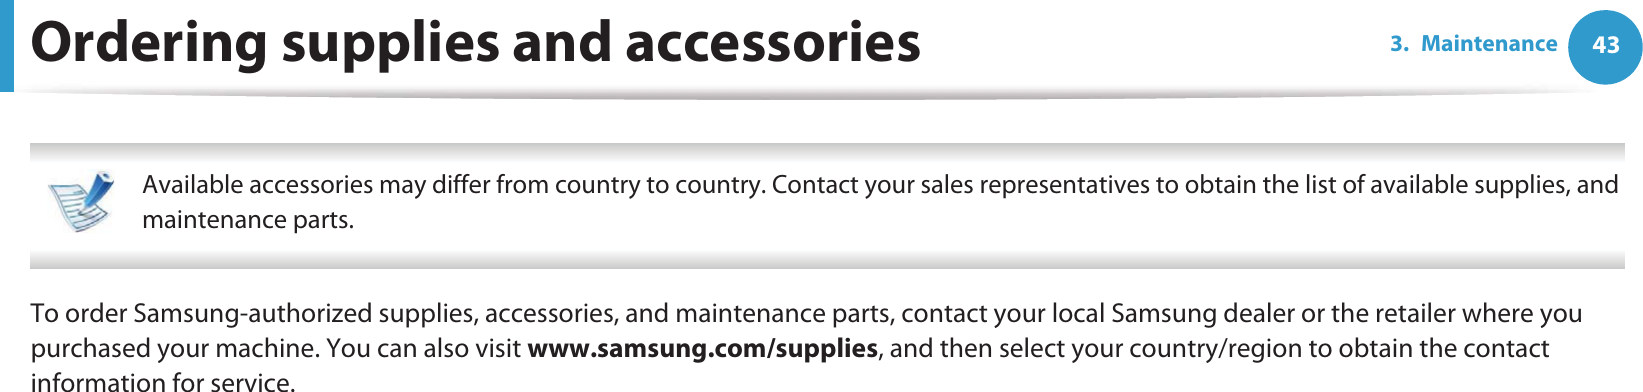 433. MaintenanceOrdering supplies and accessories Available accessories may differ from country to country. Contact your sales representatives to obtain the list of available supplies, and maintenance parts. To order Samsung-authorized supplies, accessories, and maintenance parts, contact your local Samsung dealer or the retailer where you purchased your machine. You can also visit www.samsung.com/supplies, and then select your country/region to obtain the contact information for service.